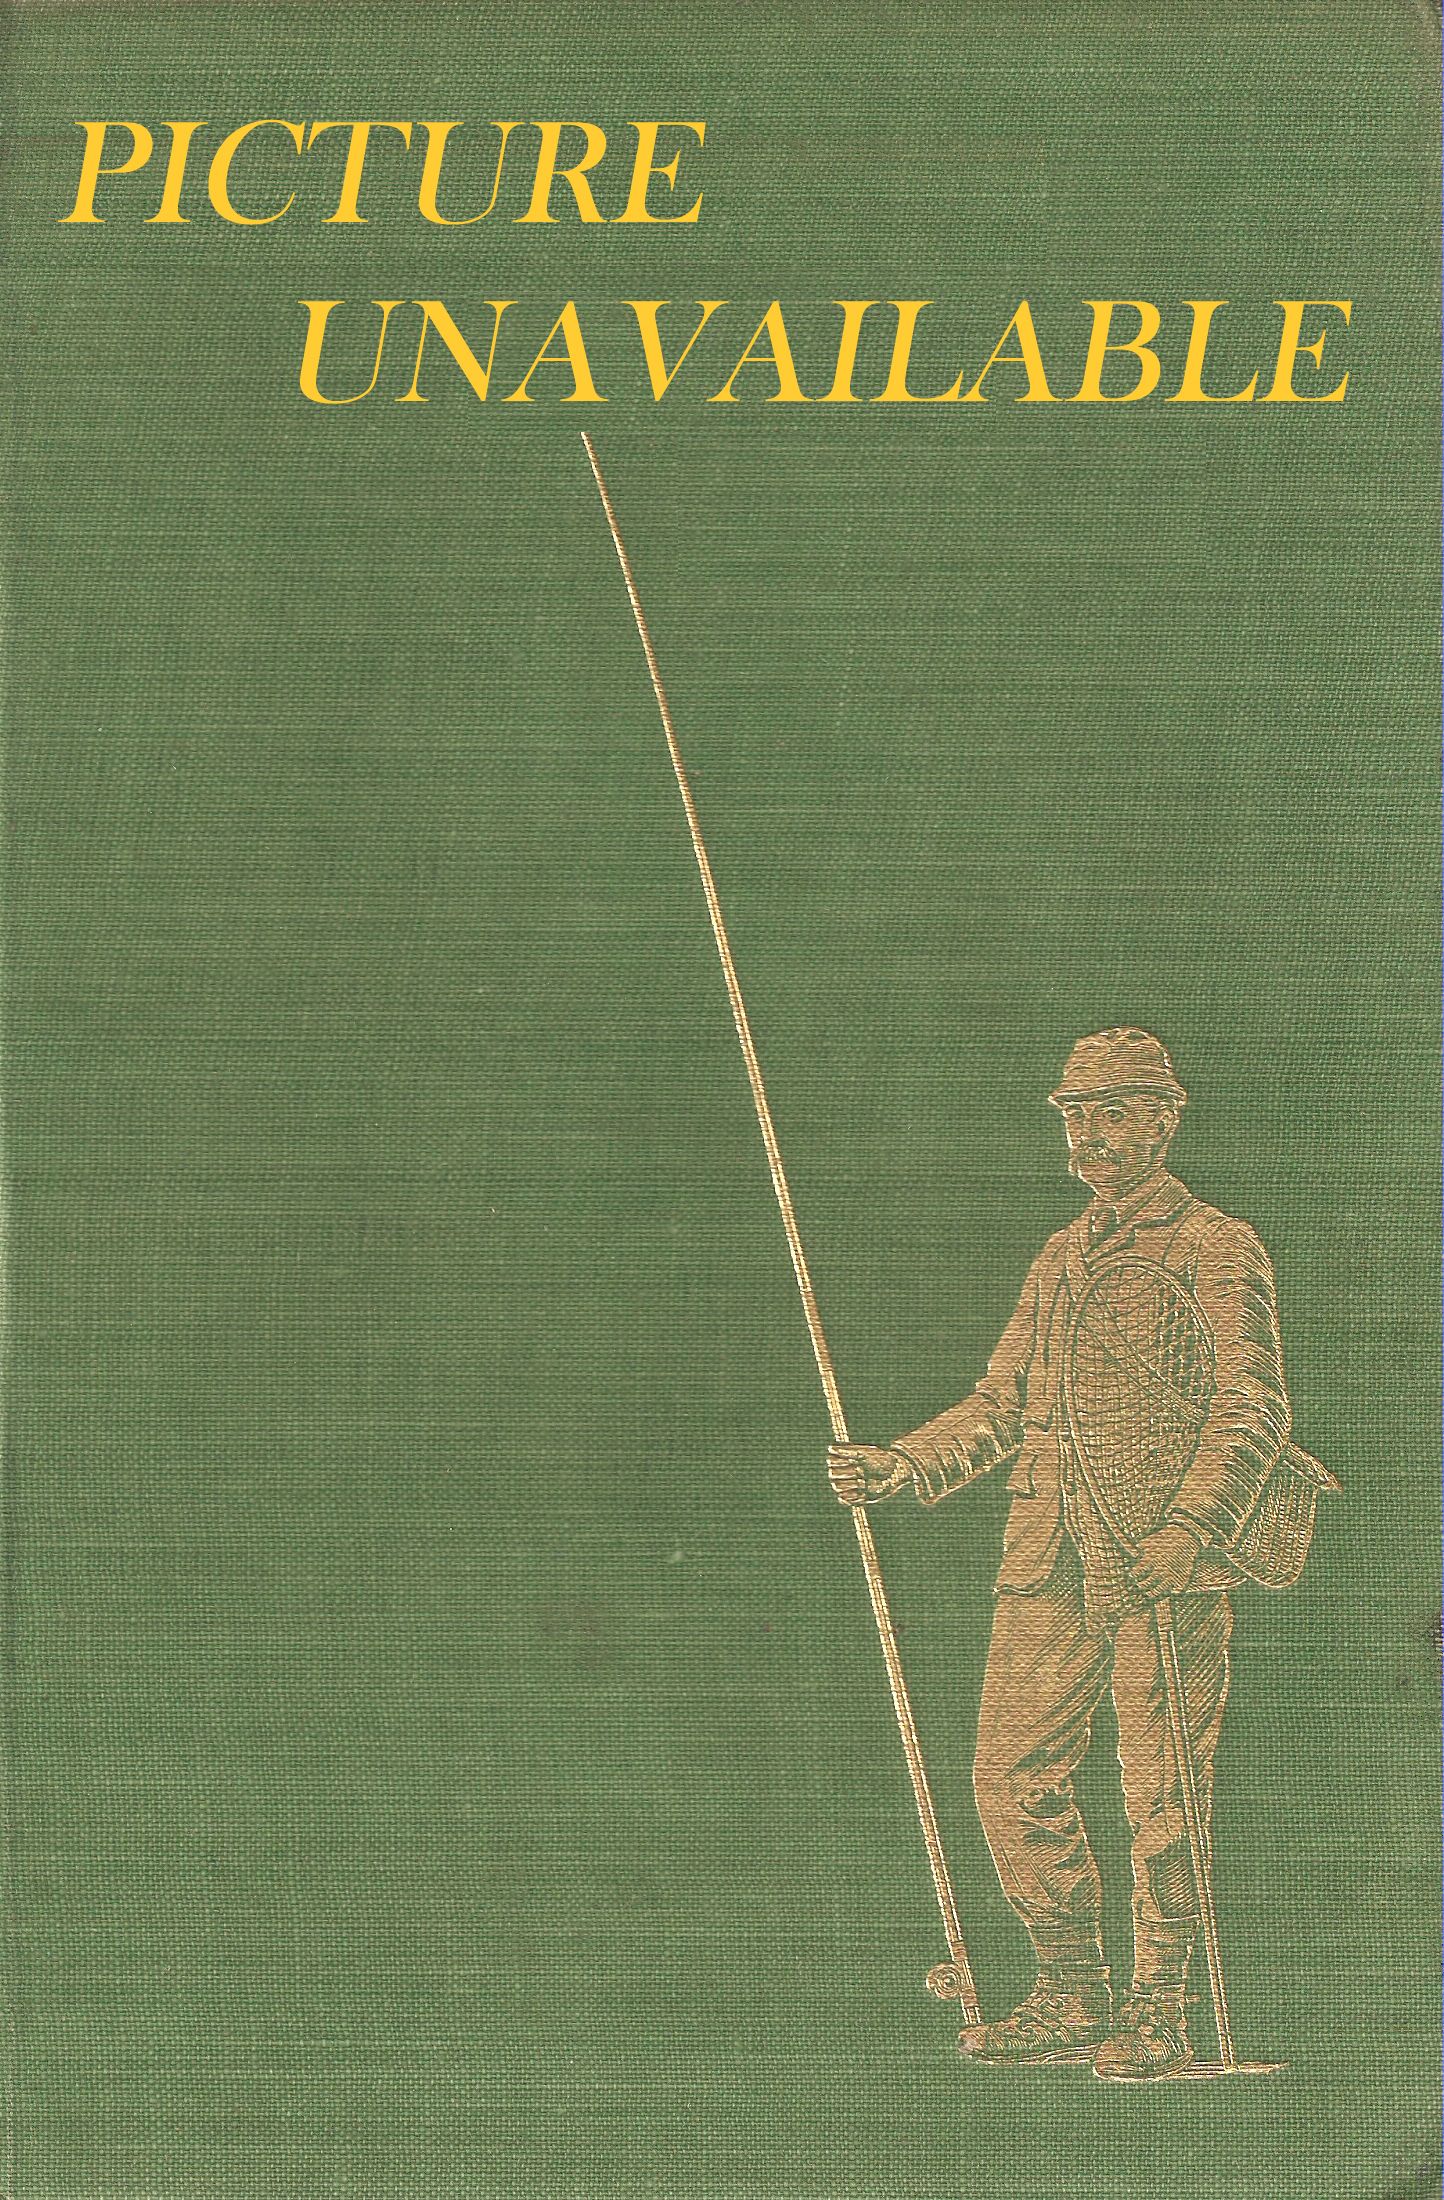 THE RUDIMENTS OF ANGLING: A COMPLETE TREATISE ON ANGLING FOR COARSE FISH.  By W. Powell-Owen.